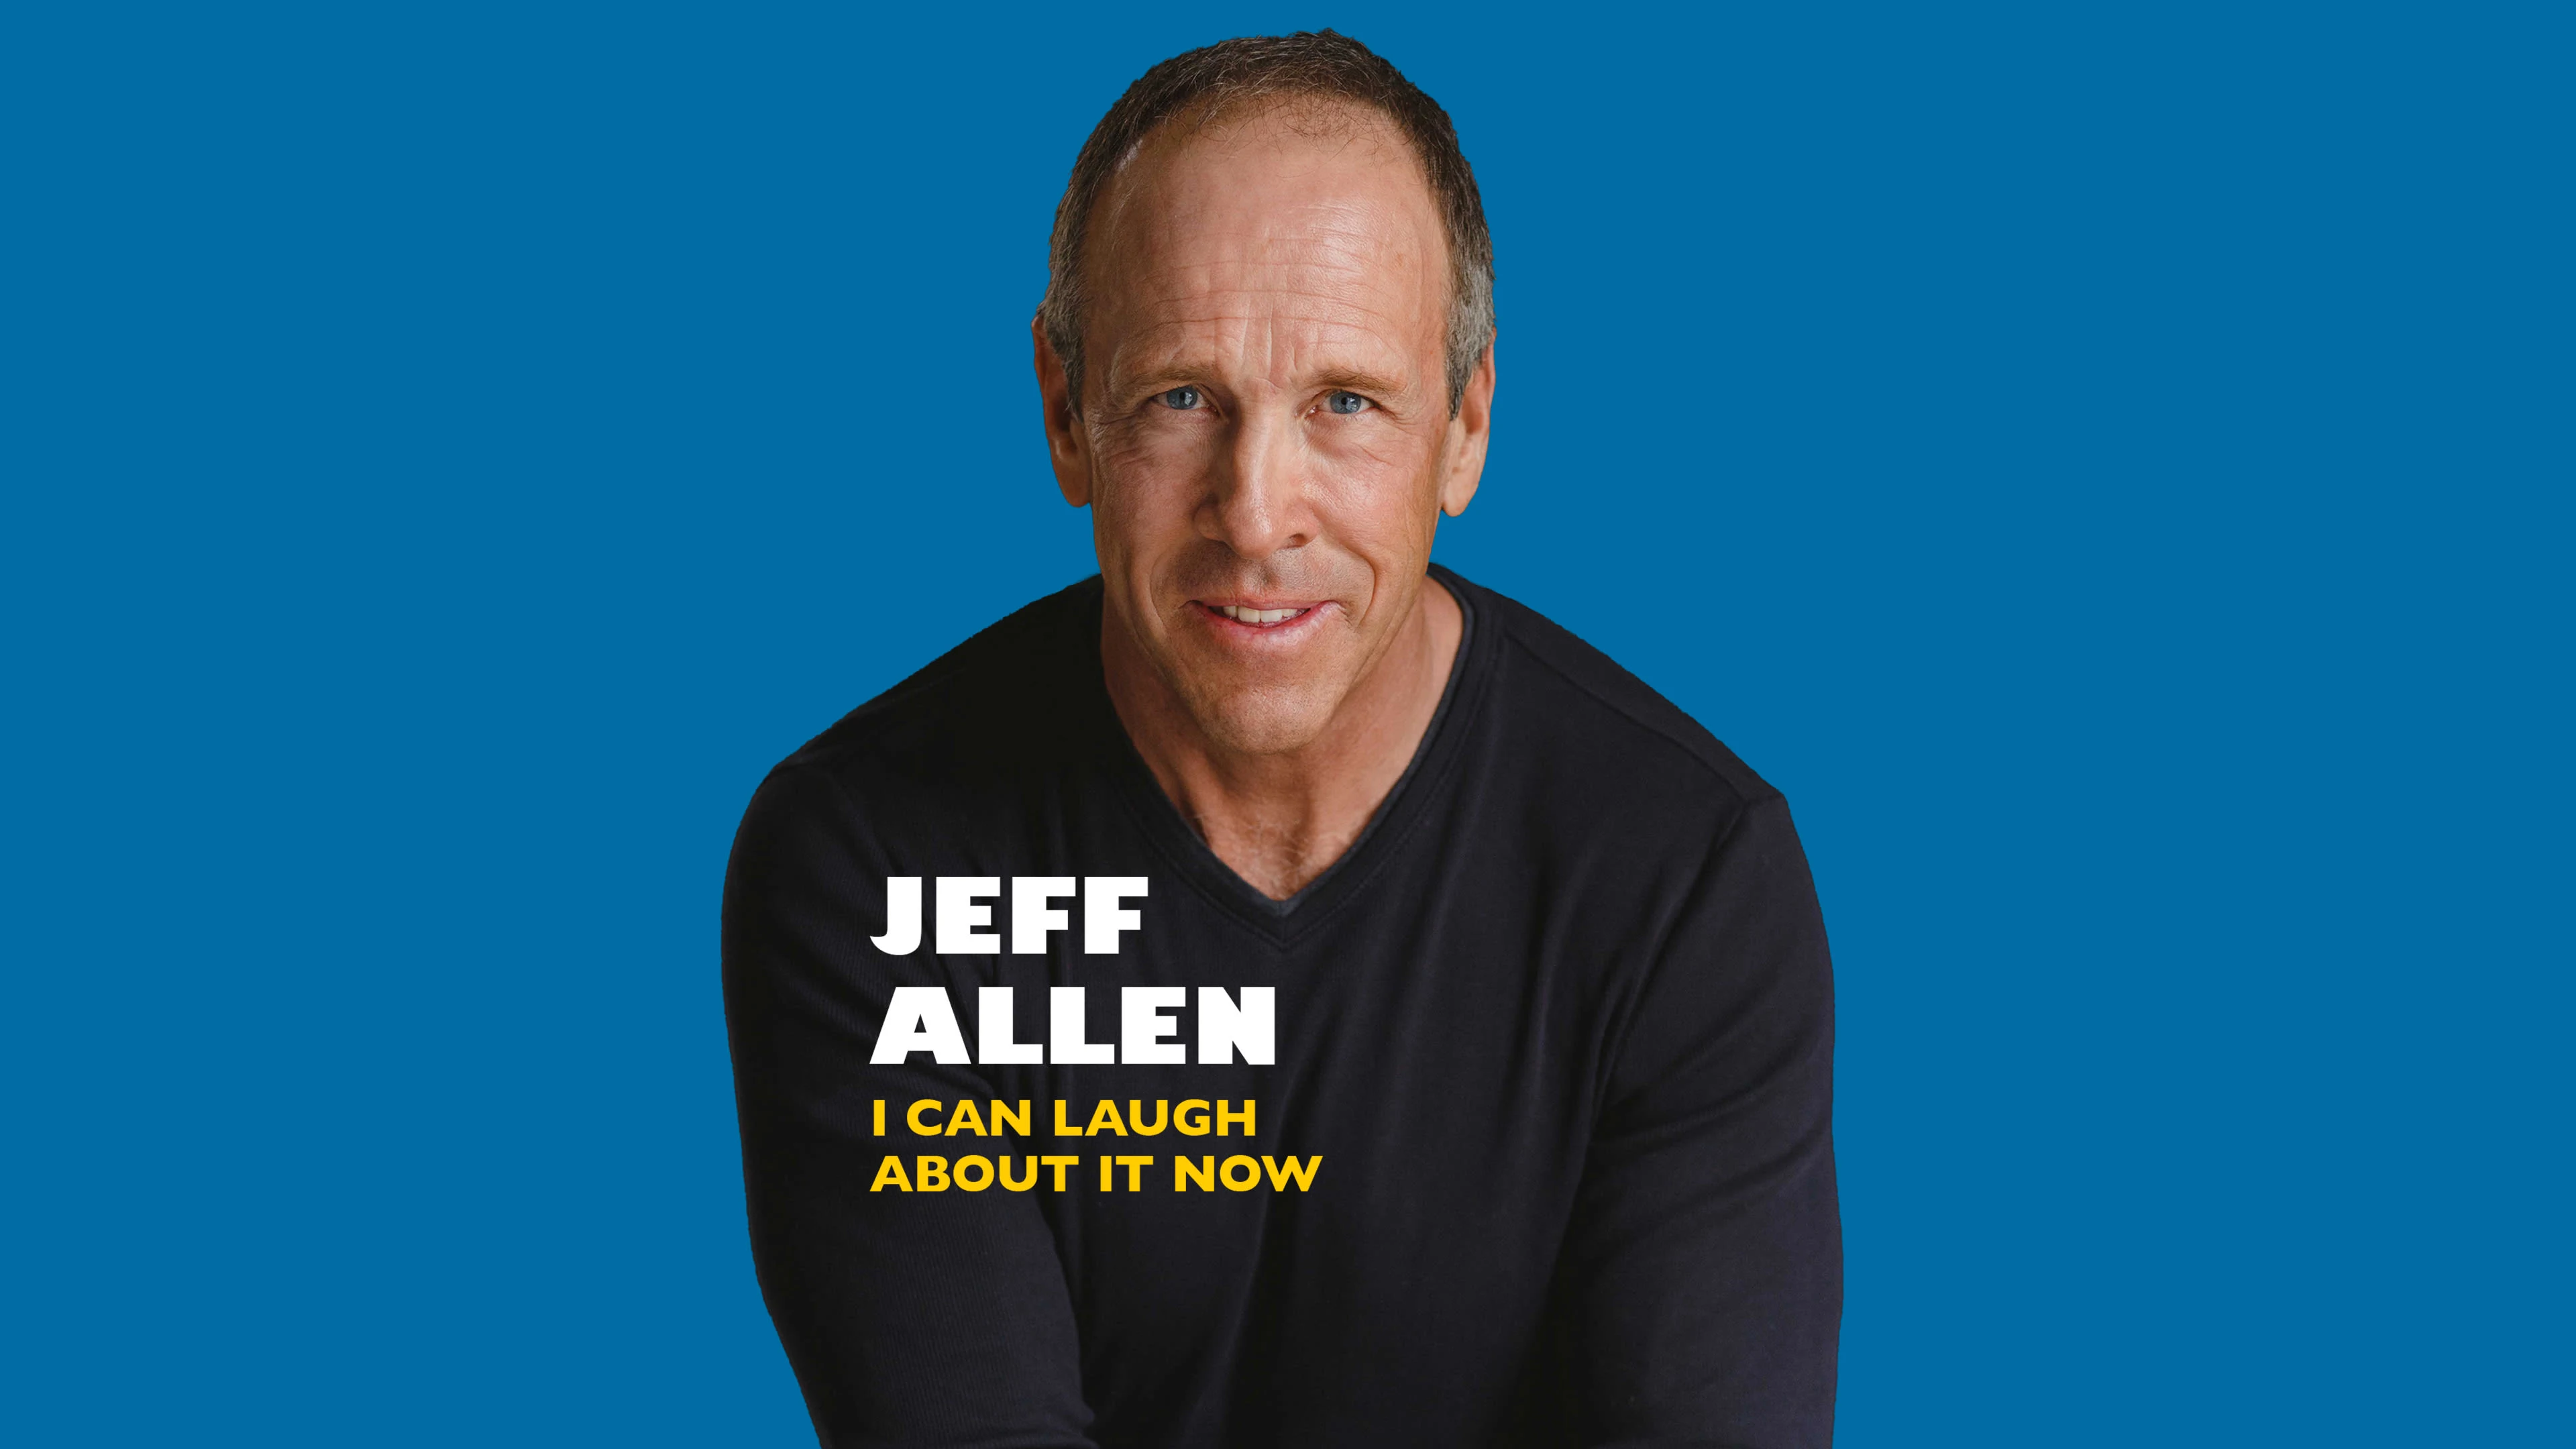 Jeff Allen - I Can Laugh About It Now